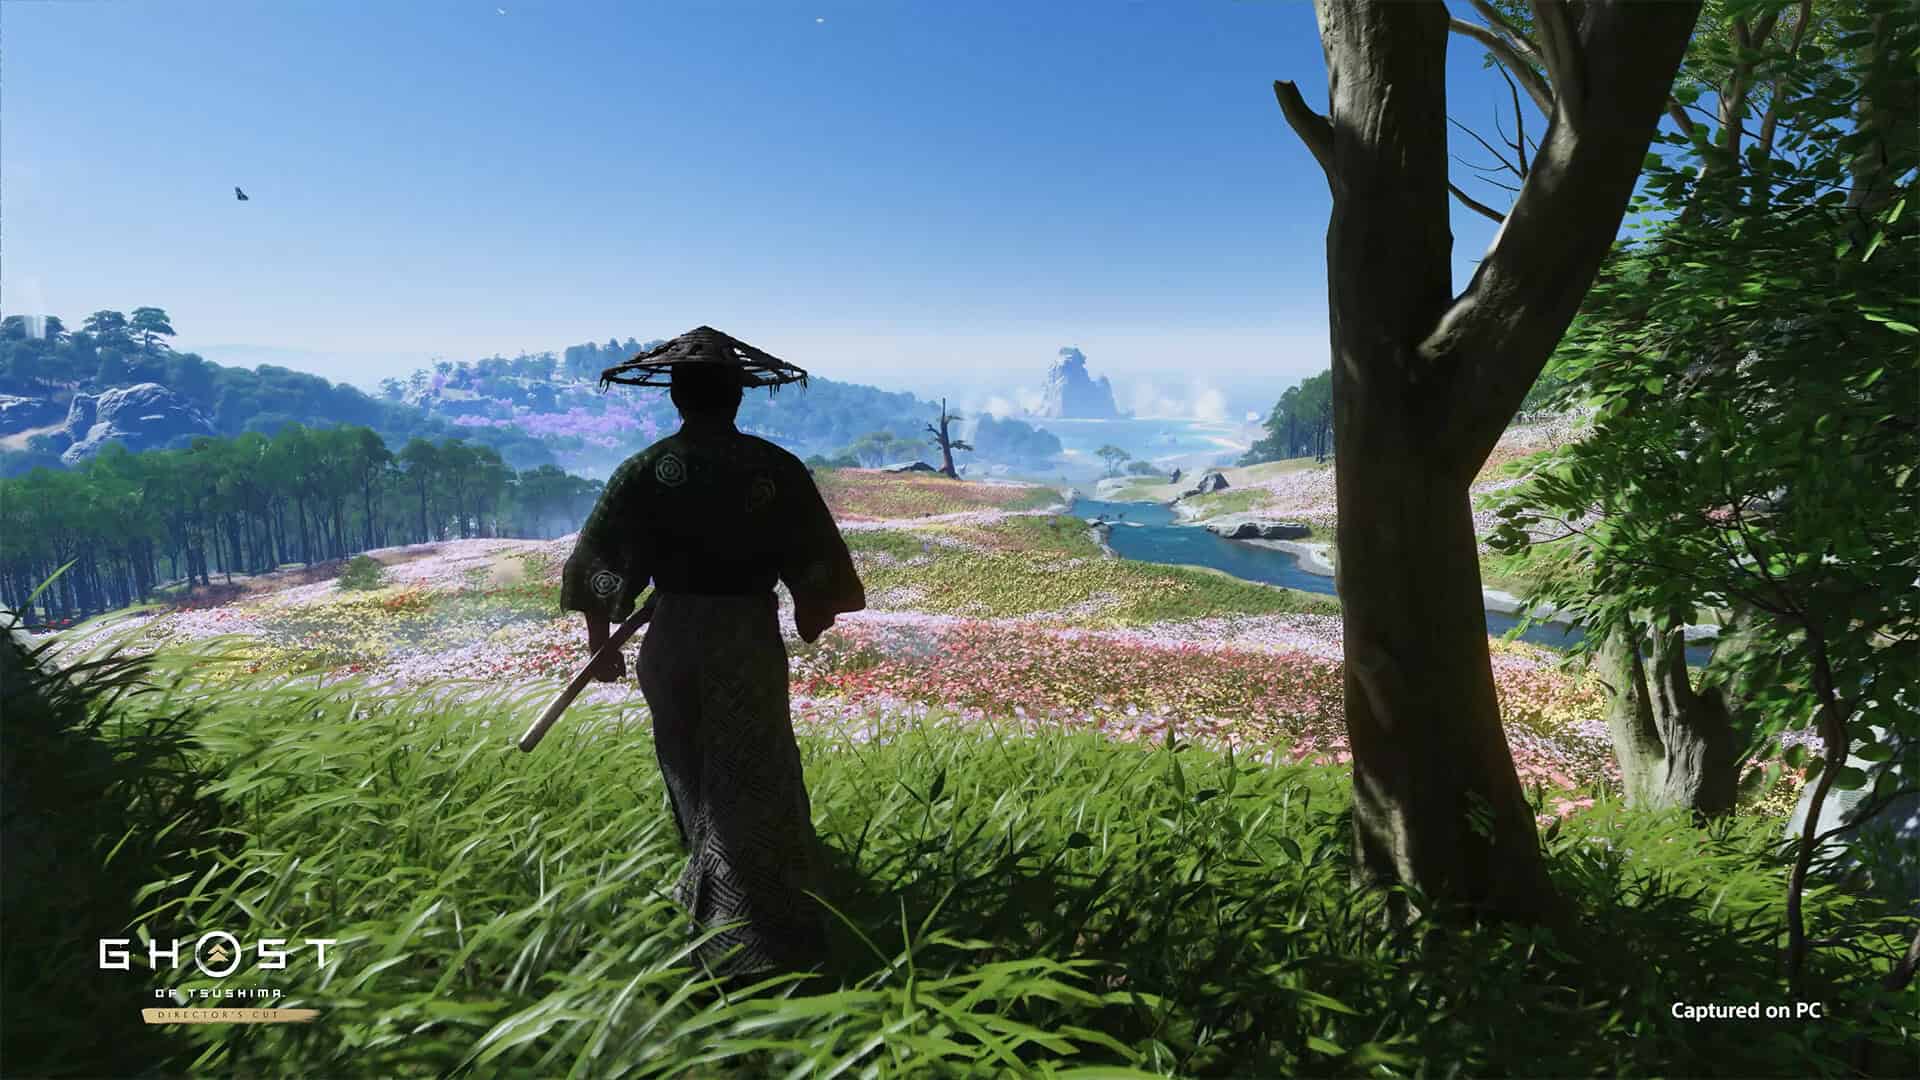 ghost of tsushima pc release date - A samurai stands in a lush meadow overlooking a river